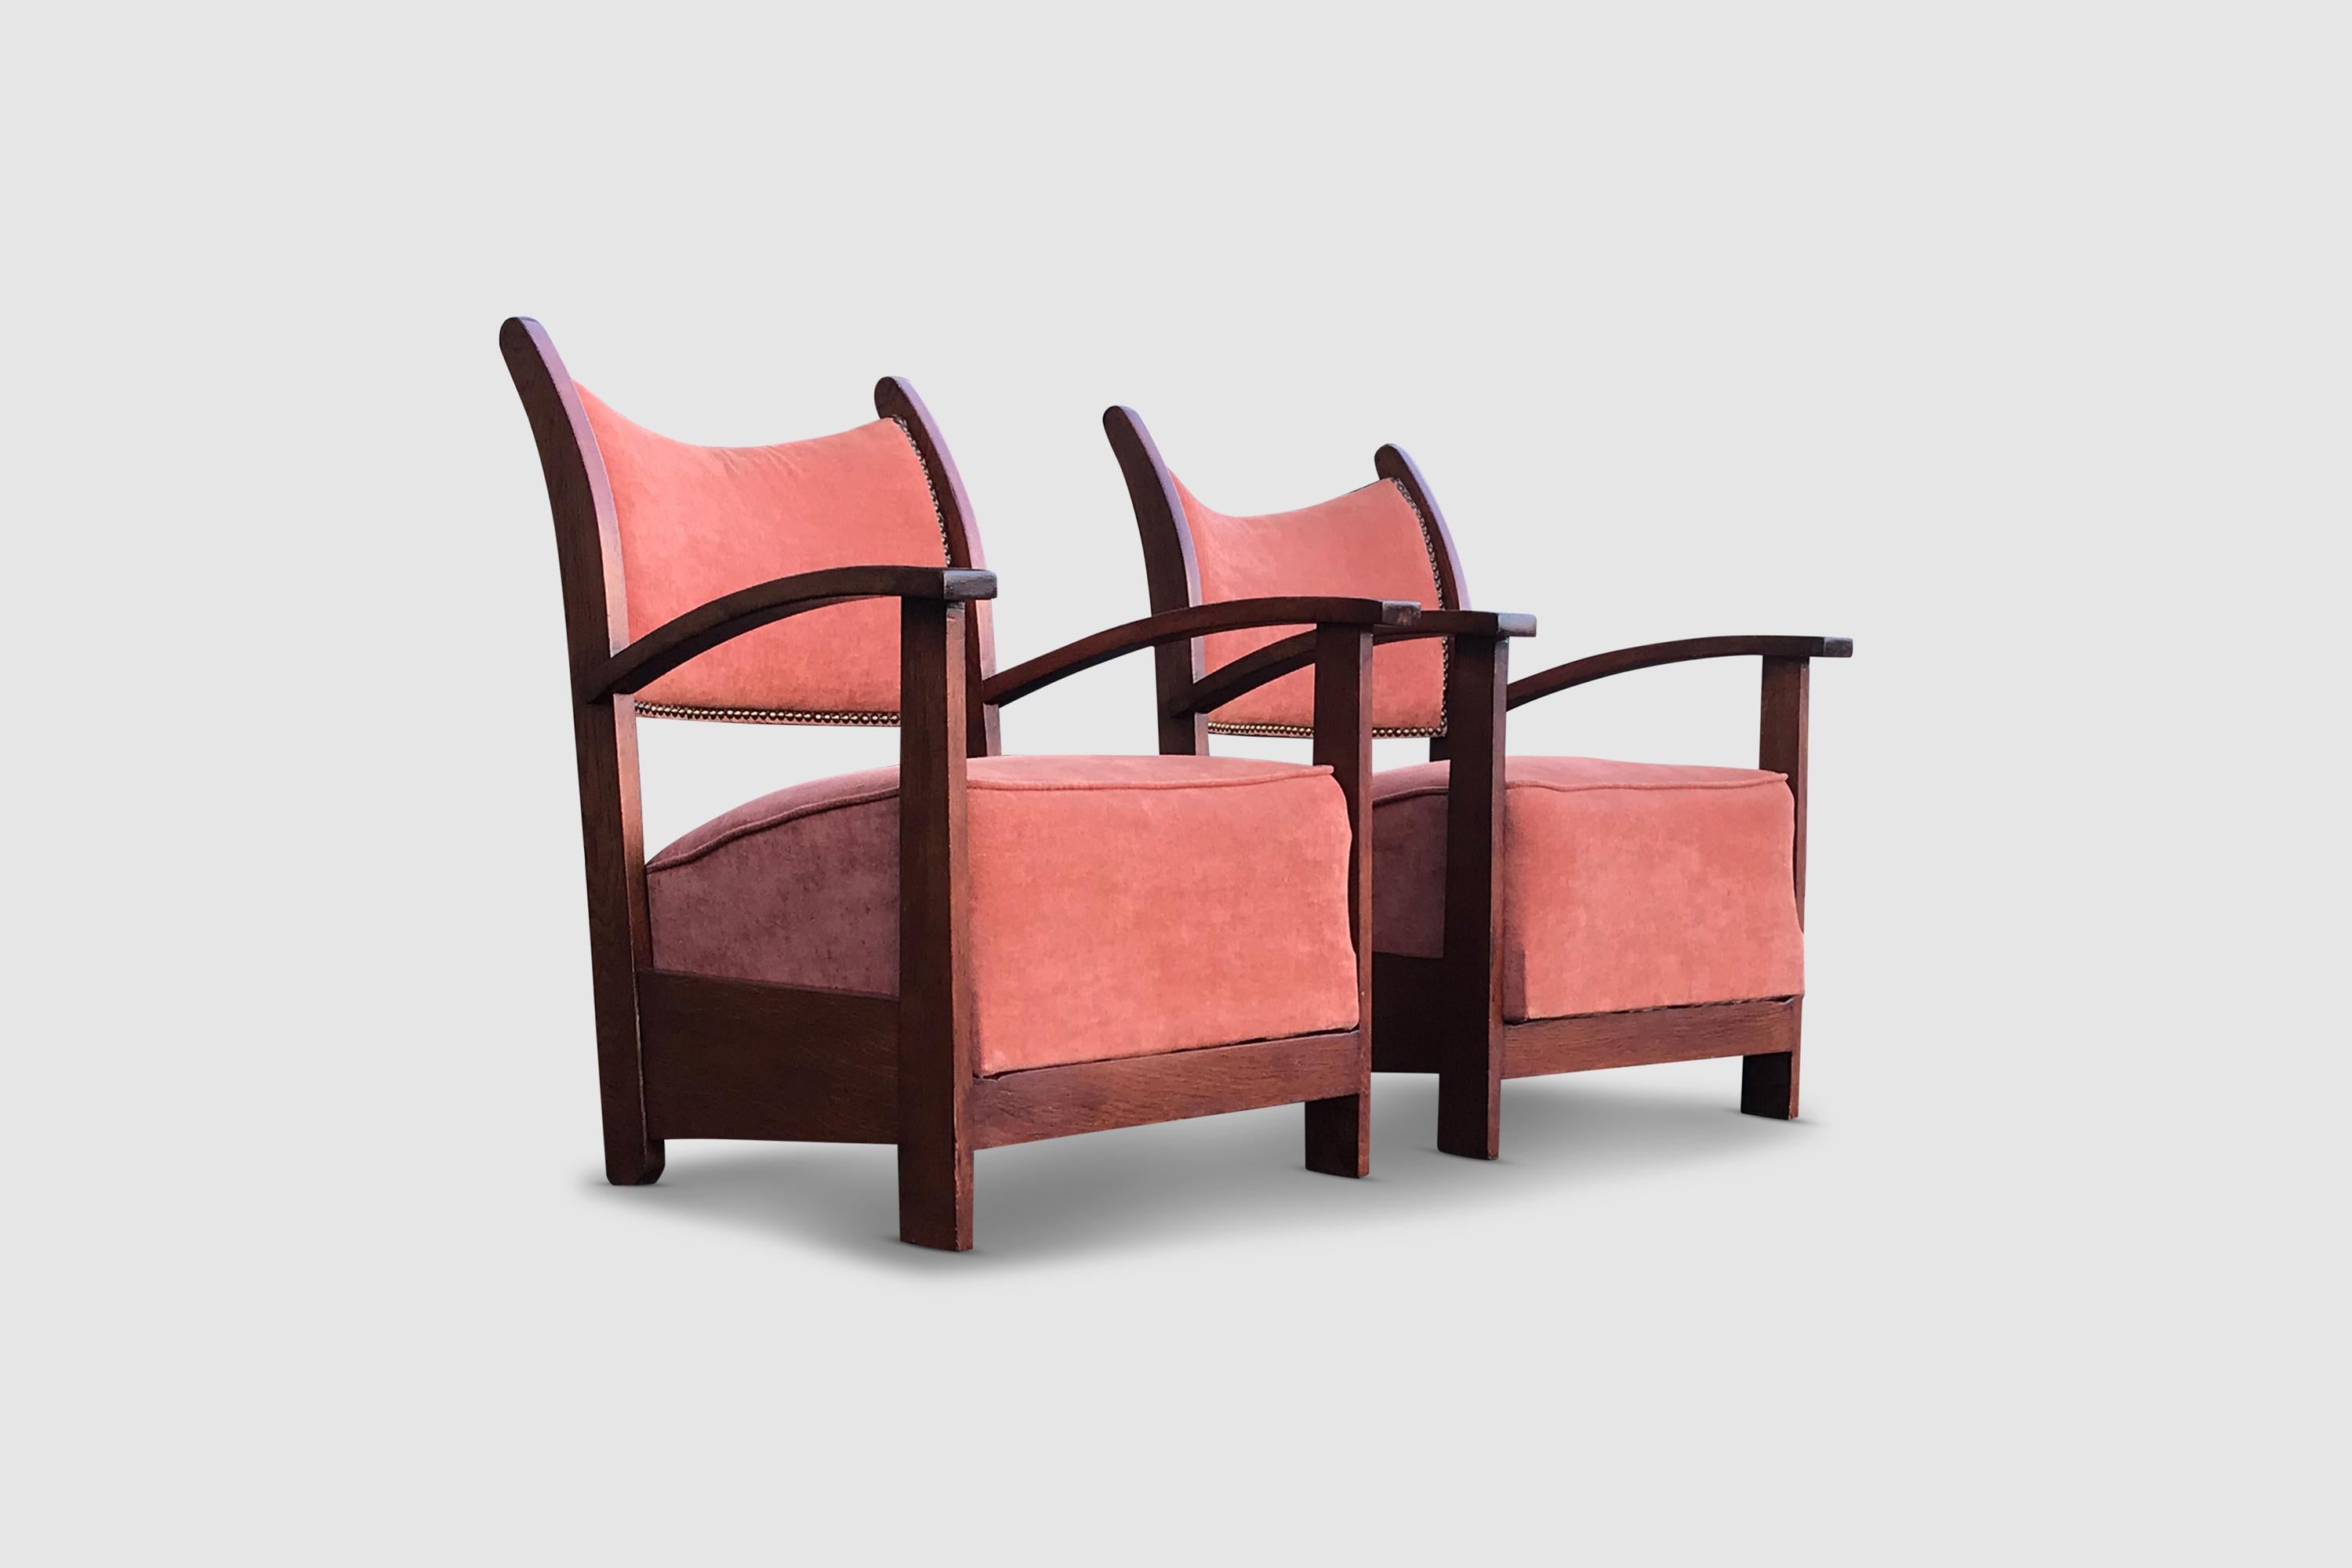 Art Deco Low Oak and Tweed Armchairs Amsterdamse School 1930s, Set of 2 For Sale